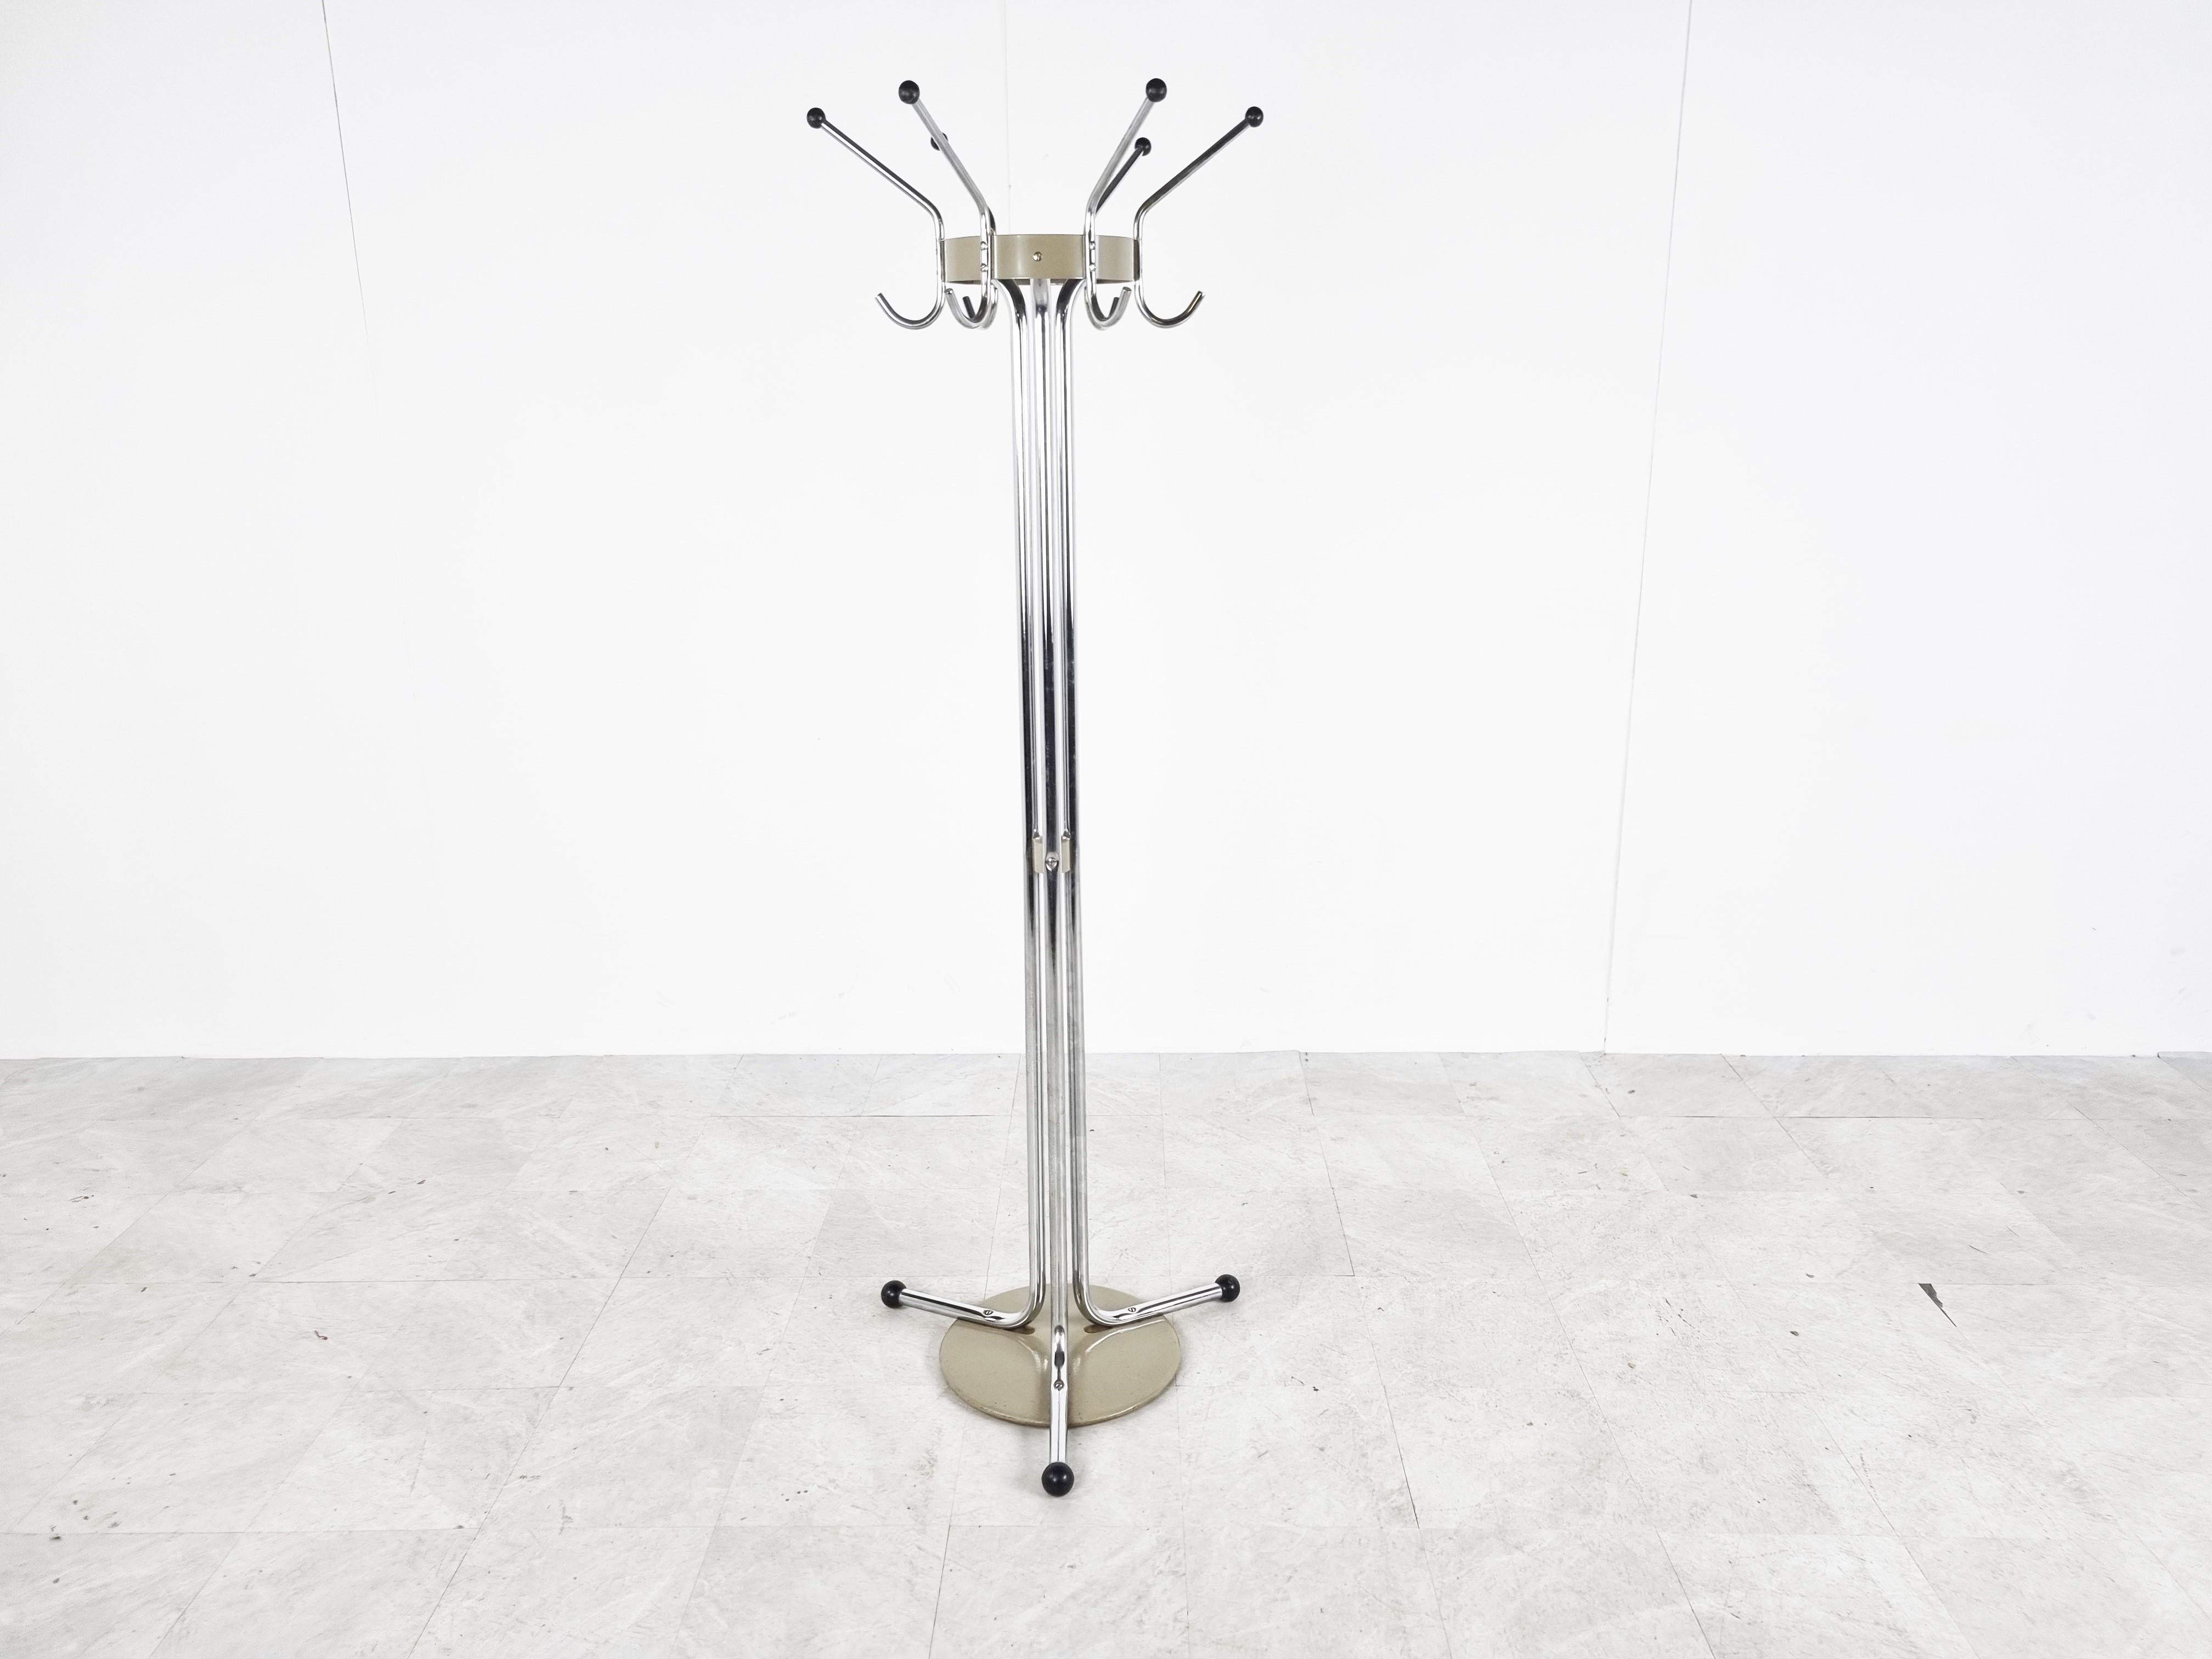 Vintage chromed steel coat stand designed by Willy Van Der Meeren for Tubax. - Model 022

These where widely used in offices and for the Belgian army. 

1970s - Belgium

Good condition with age related wear.

Dimensions:
Height: